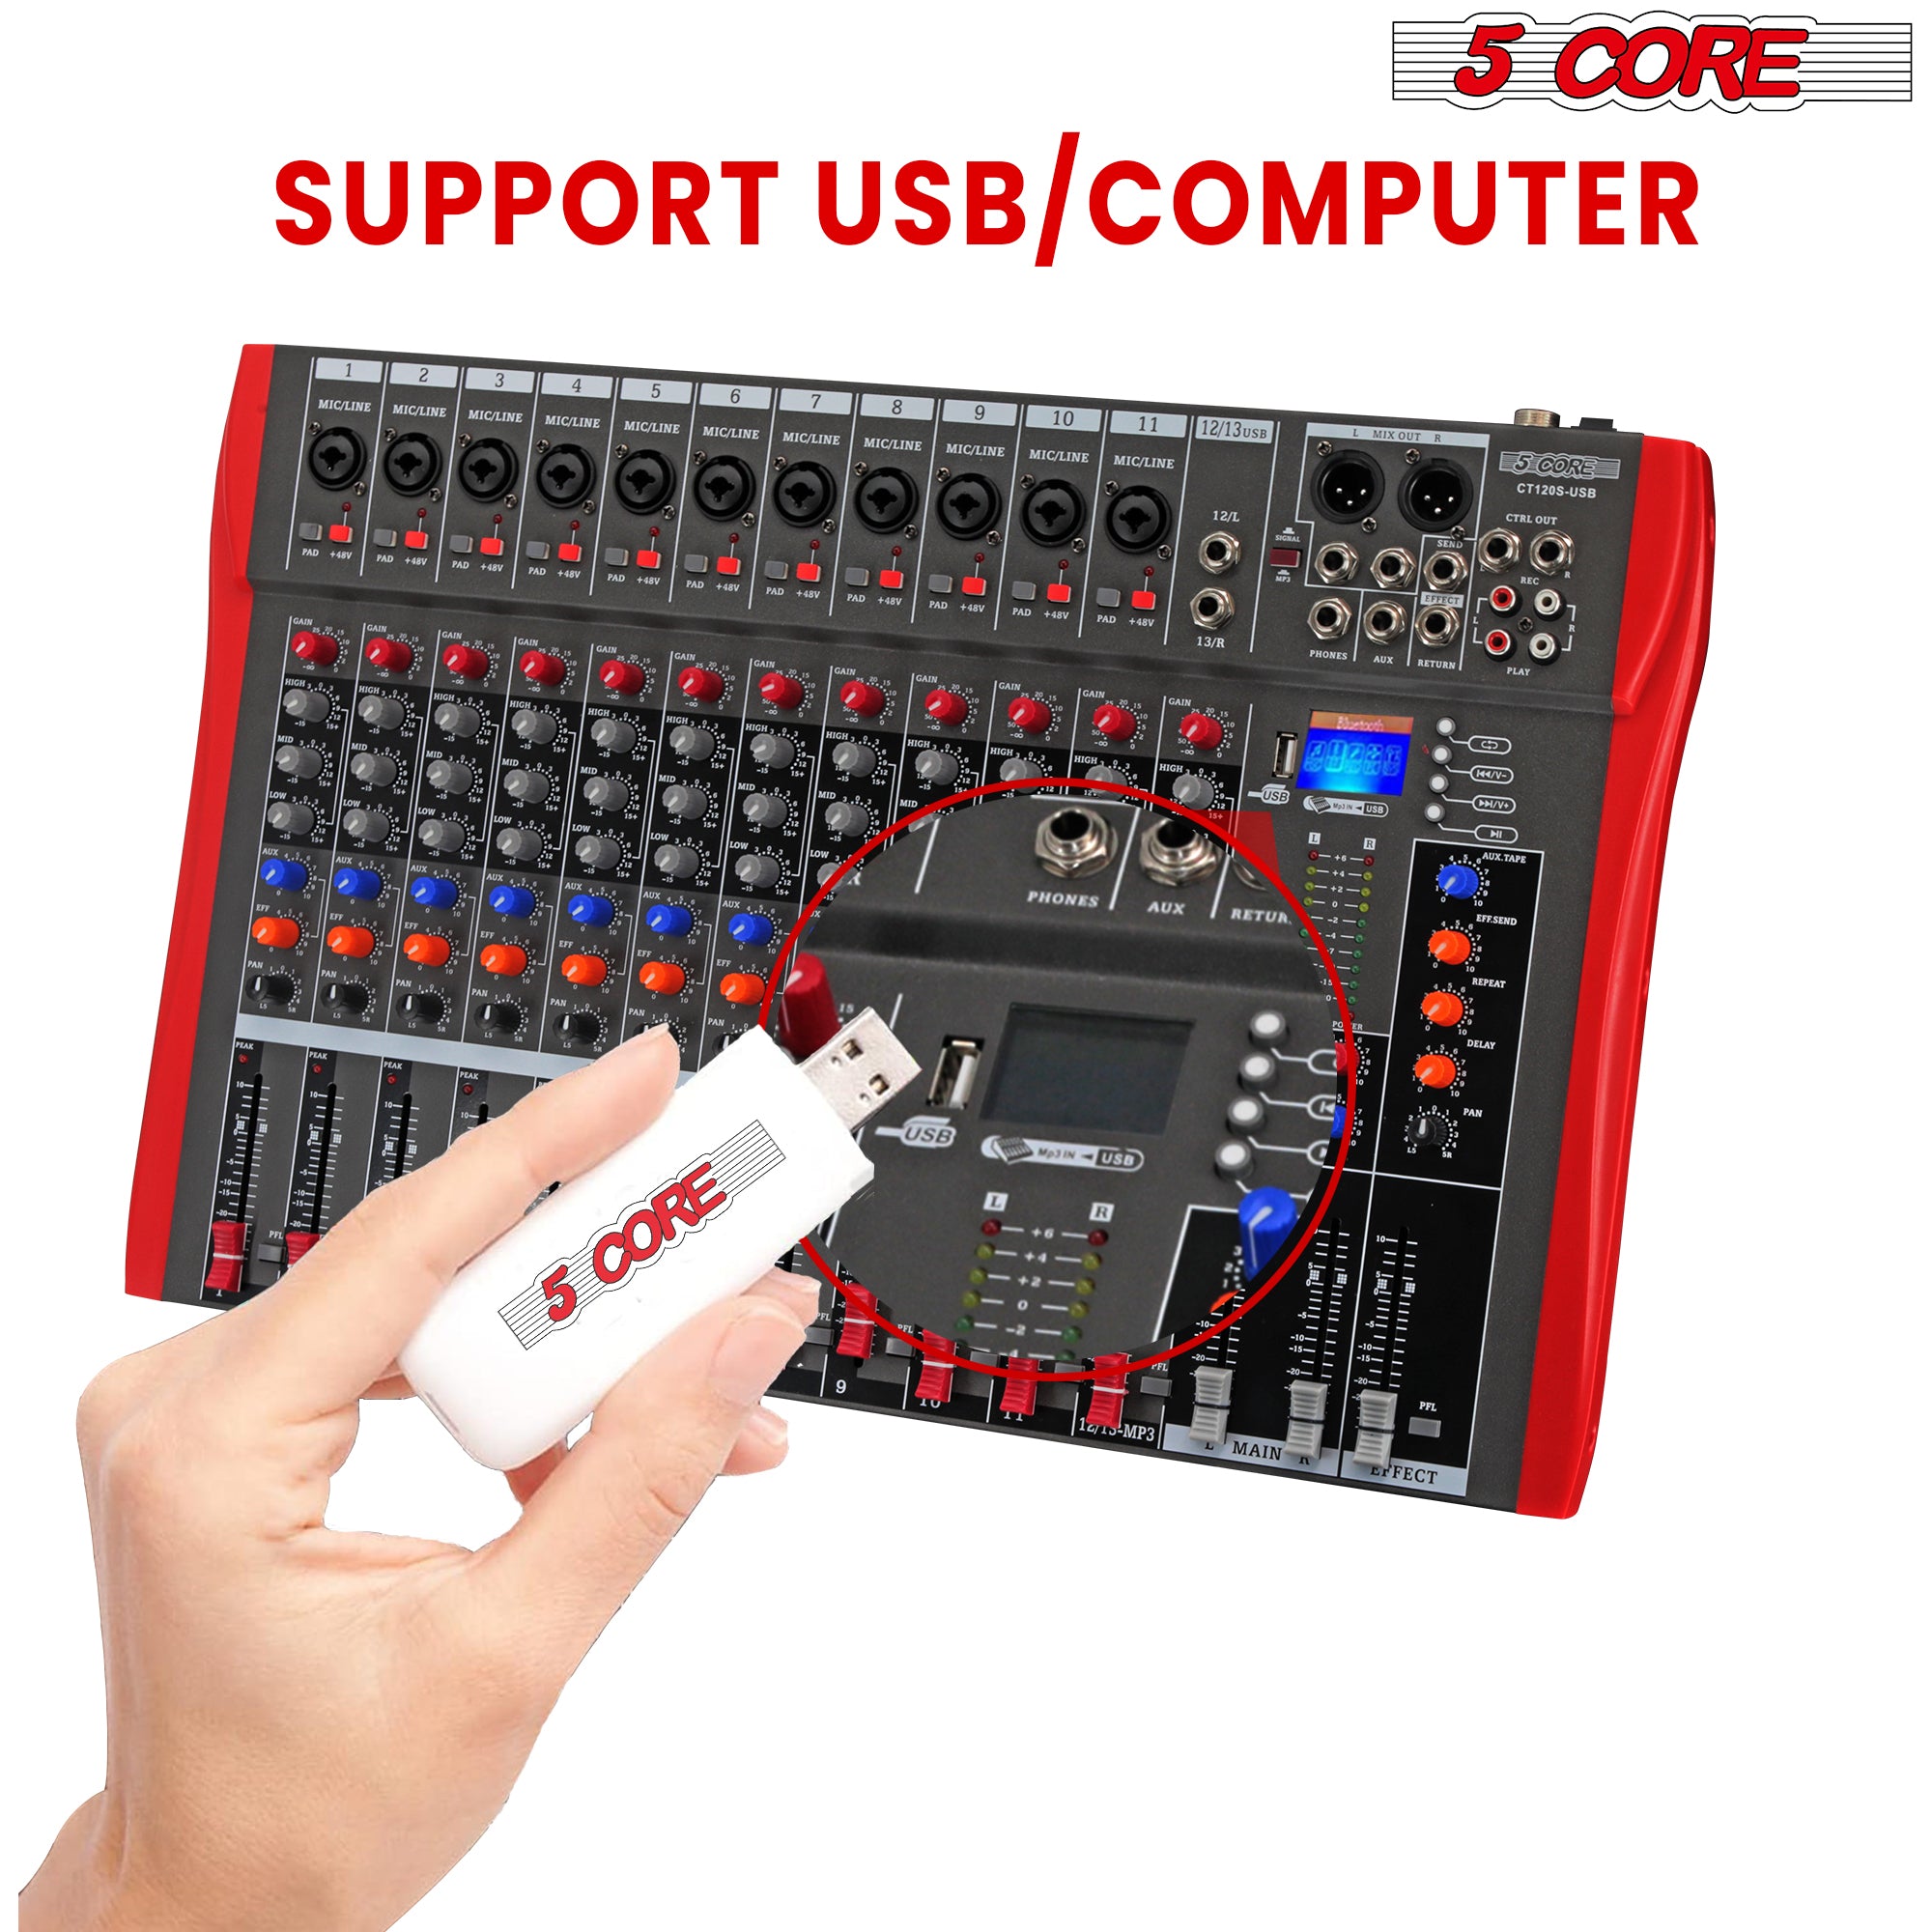 professional, versatile sound control with Bluetooth and USB features.